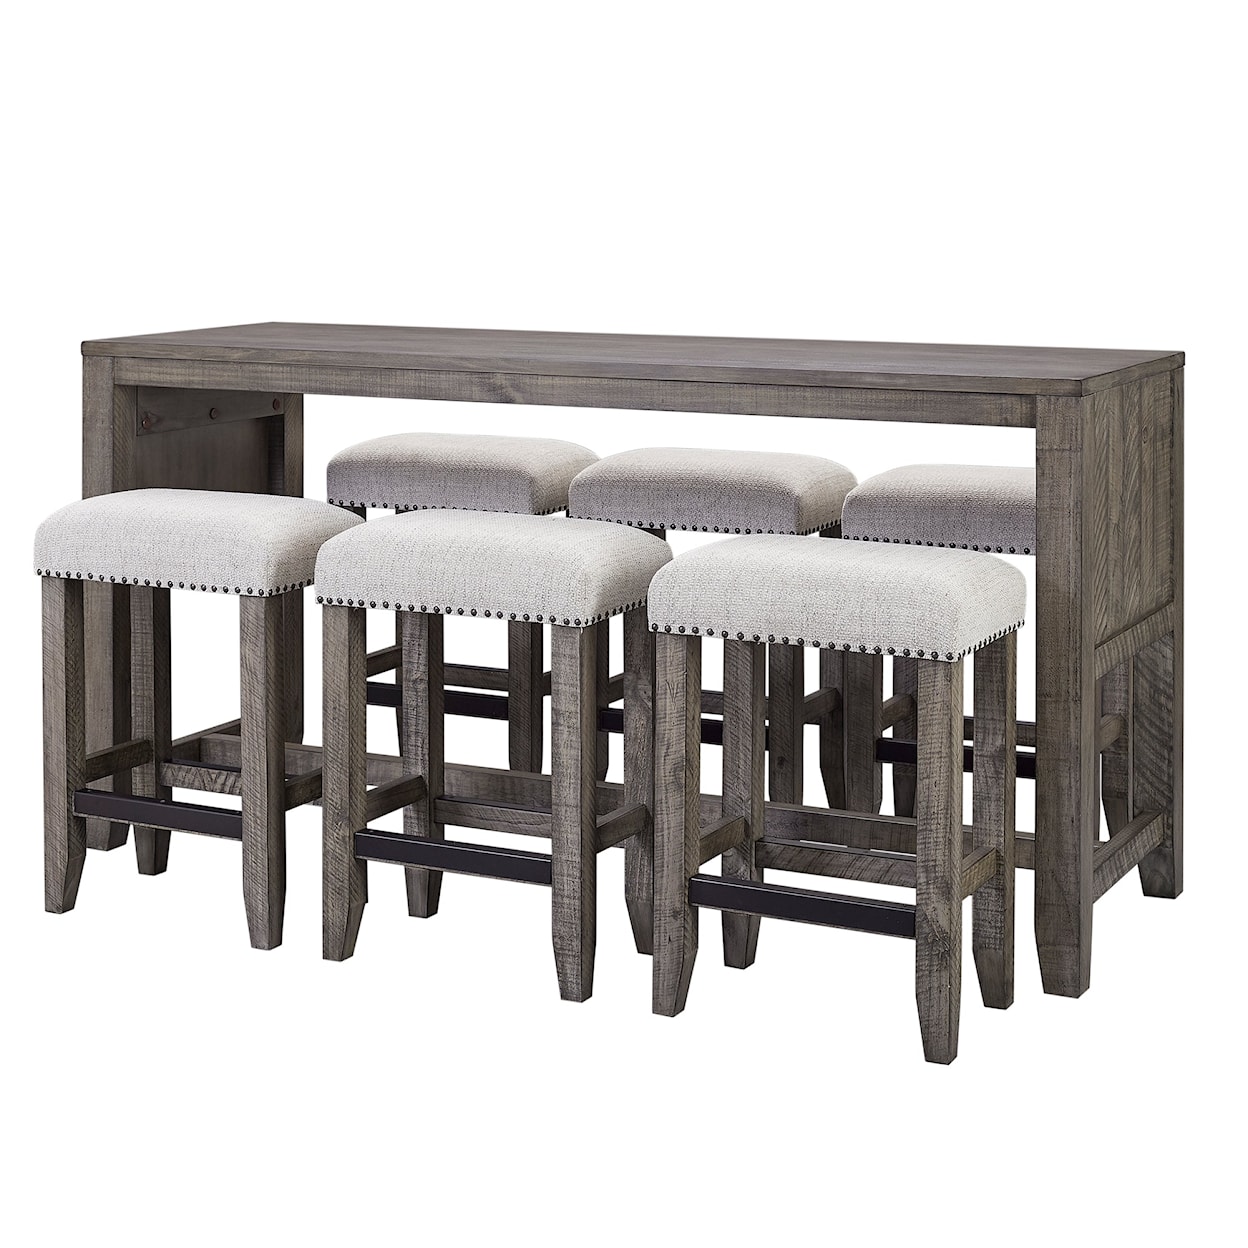 Parker House Tempe - Grey Stone Console Table with 6 Stools